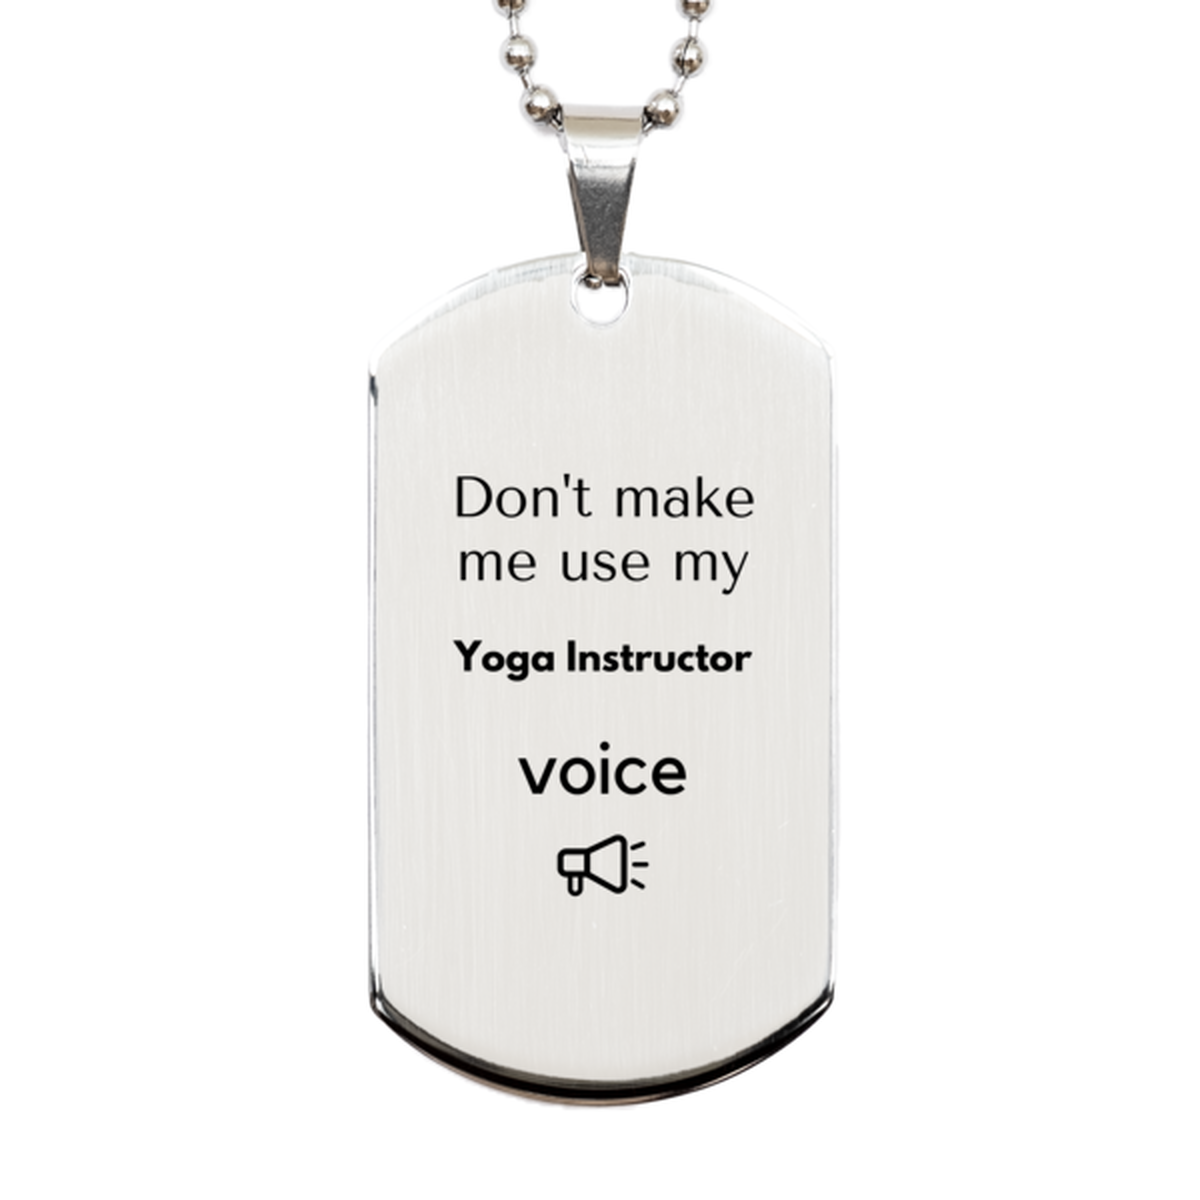 Don't make me use my Yoga Instructor voice, Sarcasm Yoga Instructor Gifts, Christmas Yoga Instructor Silver Dog Tag Birthday Unique Gifts For Yoga Instructor Coworkers, Men, Women, Colleague, Friends